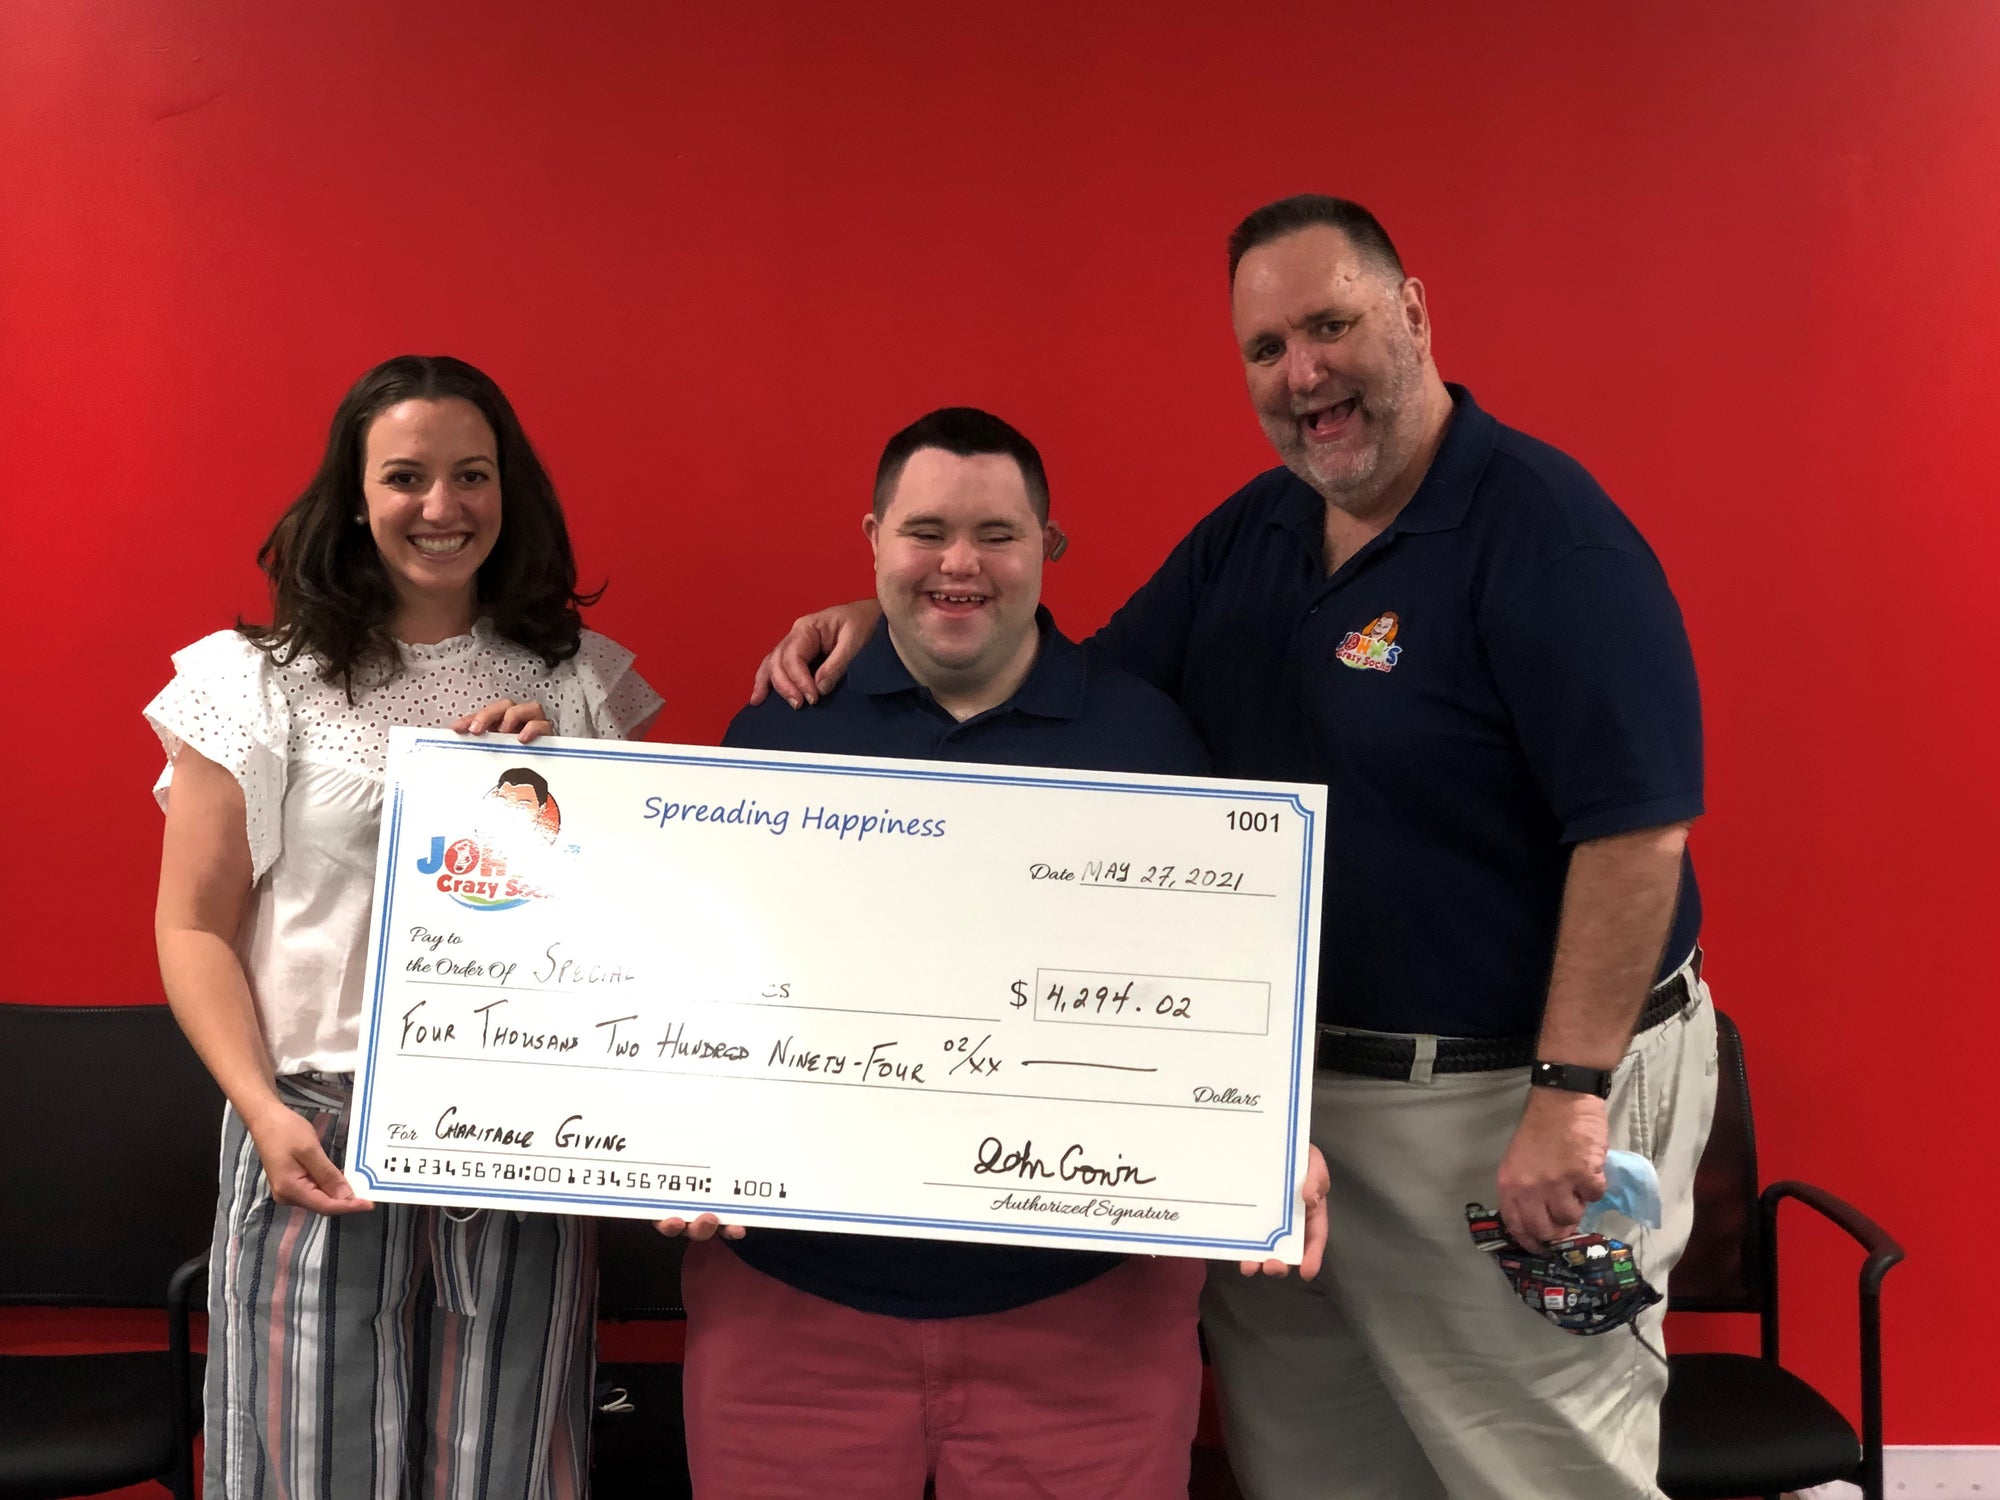 John of John's Crazy Socks Delivers a Donation Check to the Special Olympics